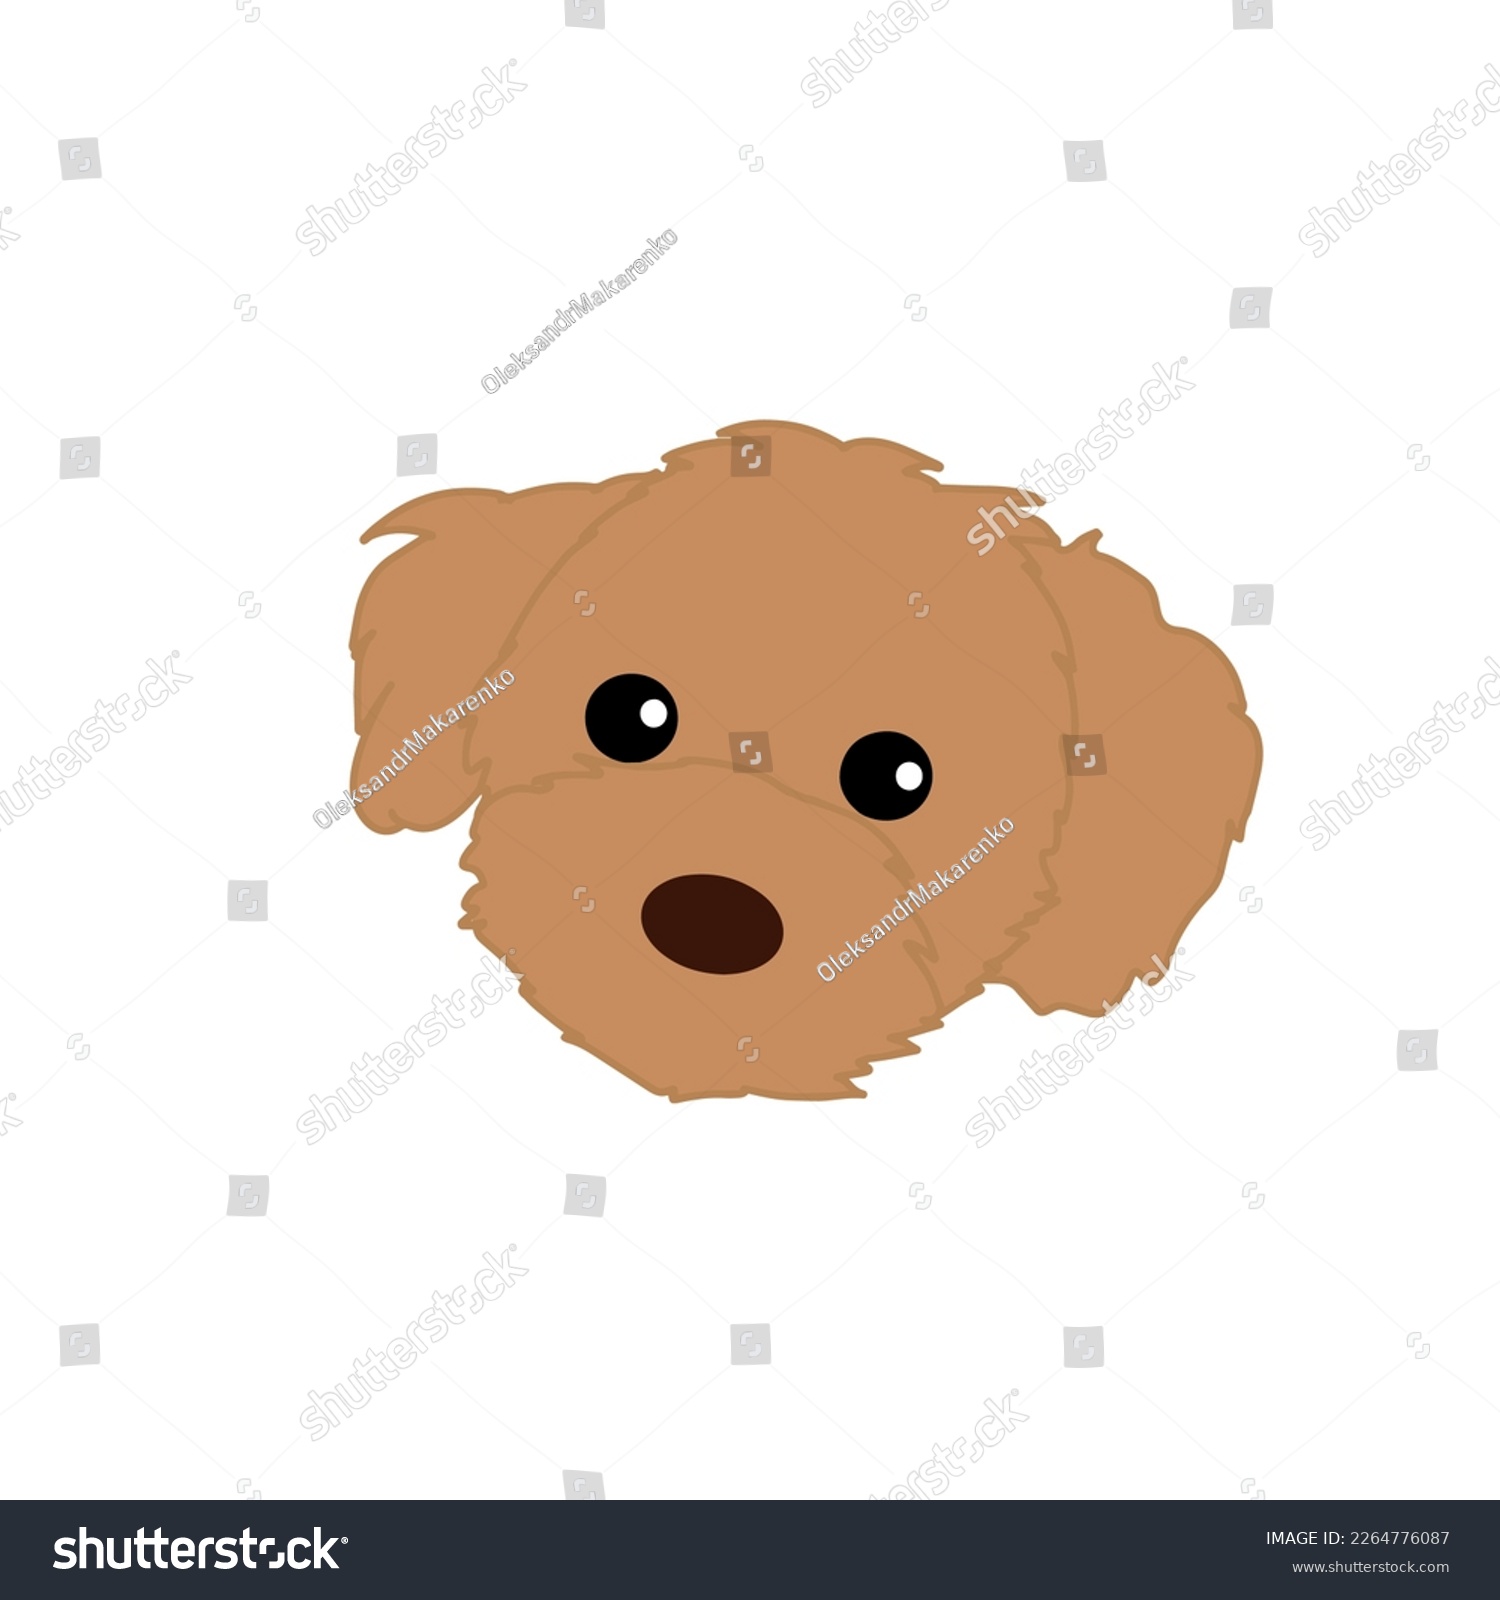 SVG of Dog face vector illustration. Cute brown maltipoo puppy face. Fluffy red dog head cartoon icon. Labradoodle puppy svg